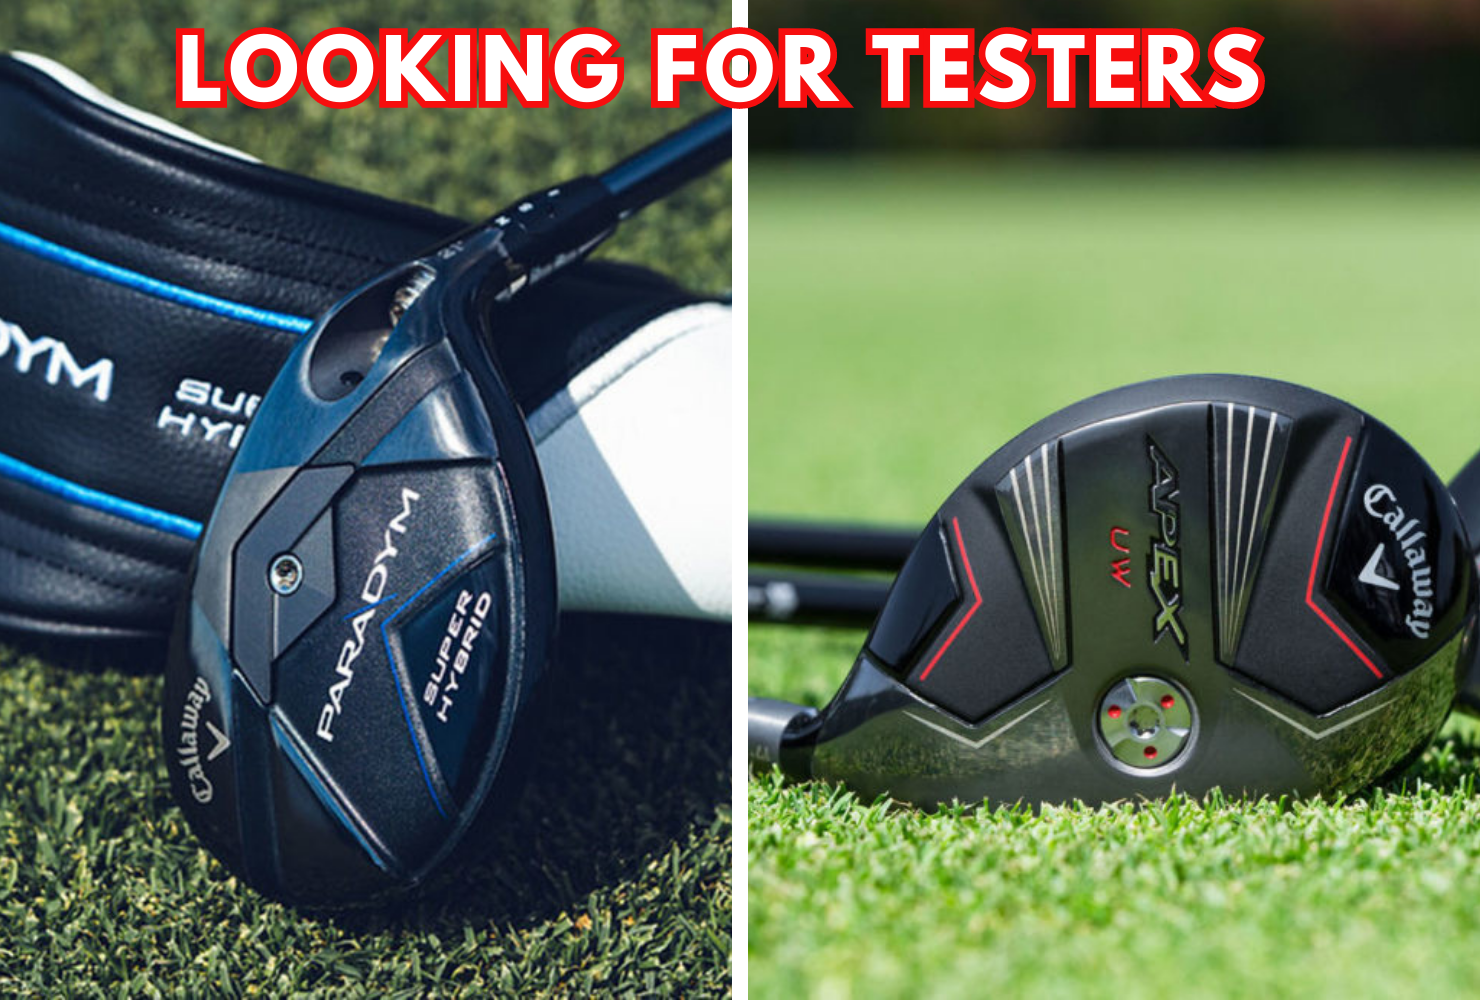 ANNOUNCEMENT - Looking For Testers: Callaway Paradym Super Hybrid